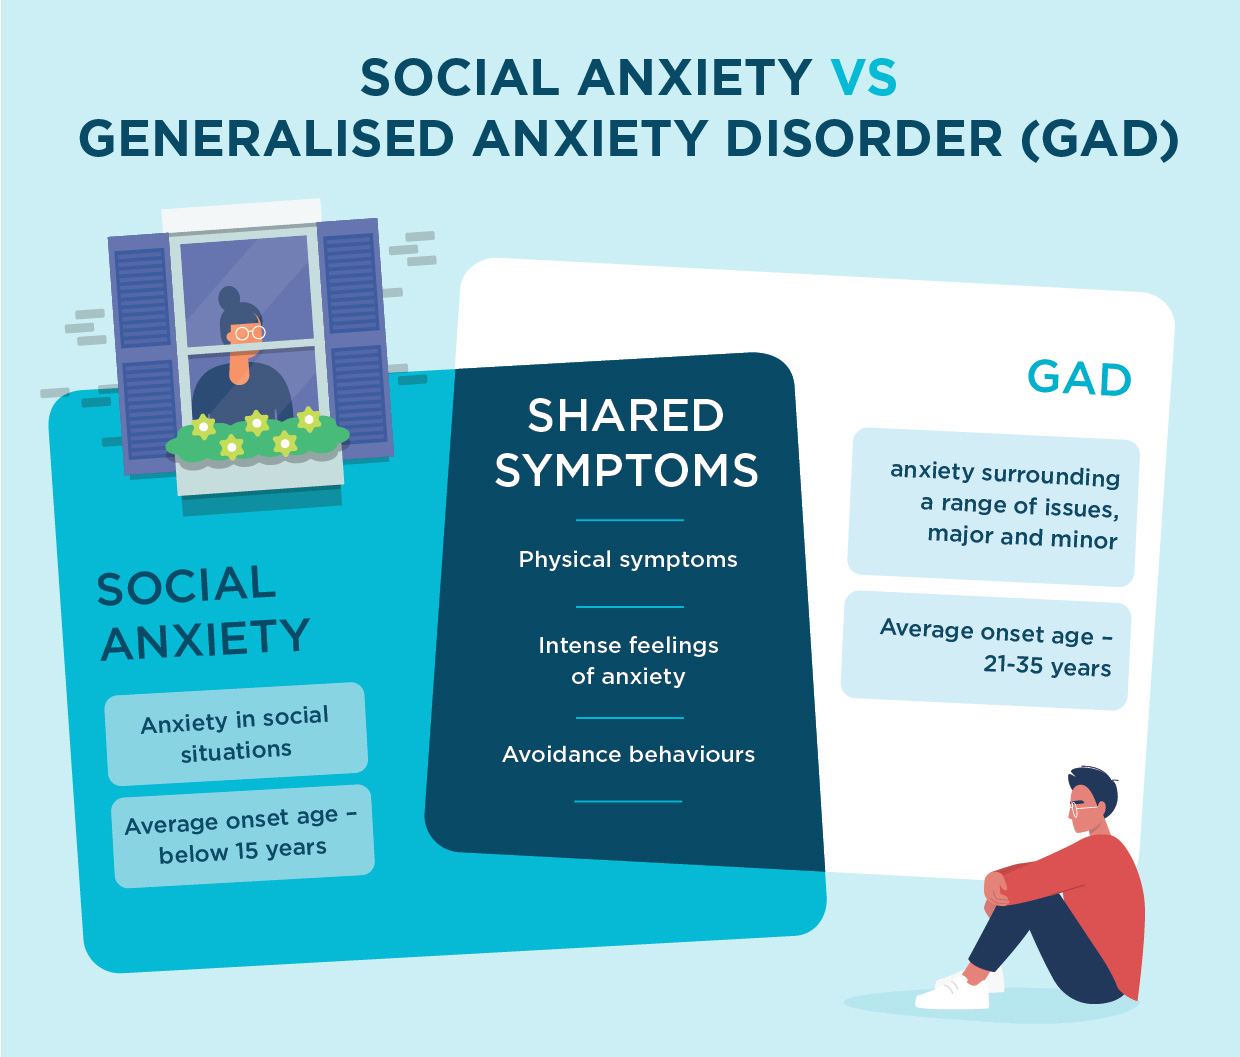 social anxiety compared to generalised anxiety disorder